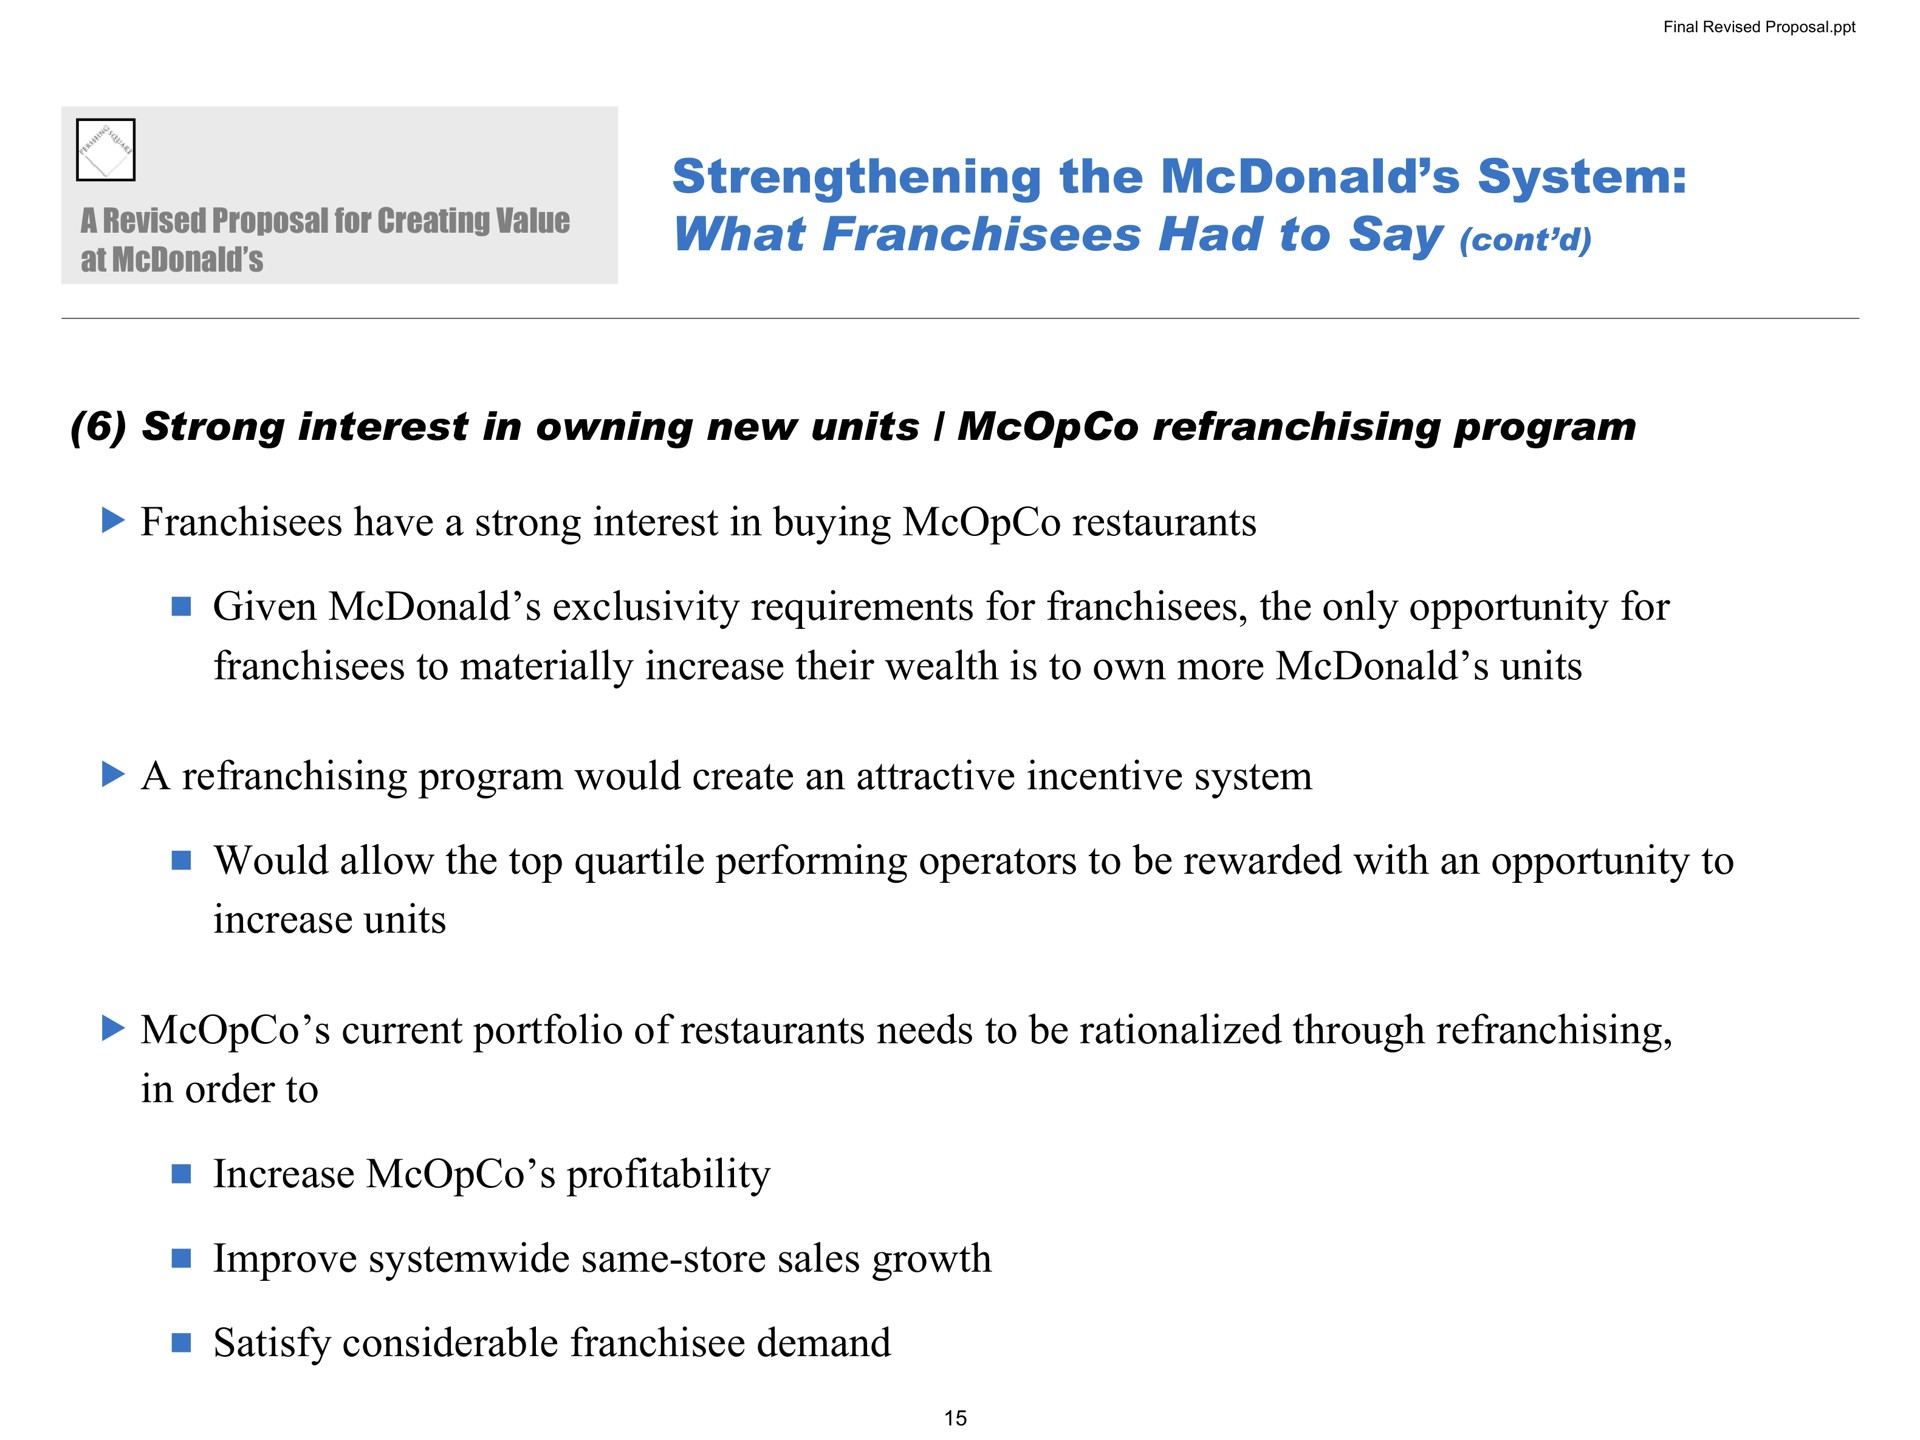 strengthening the system what franchisees had to say strong interest in owning new units program franchisees have a strong interest in buying restaurants given exclusivity requirements for franchisees the only opportunity for franchisees to materially increase their wealth is to own more units a program would create an attractive incentive system would allow the top quartile performing operators to be rewarded with an opportunity to increase units current portfolio of restaurants needs to be rationalized through in order to increase profitability improve same store sales growth satisfy considerable demand proposal revised creating | Pershing Square